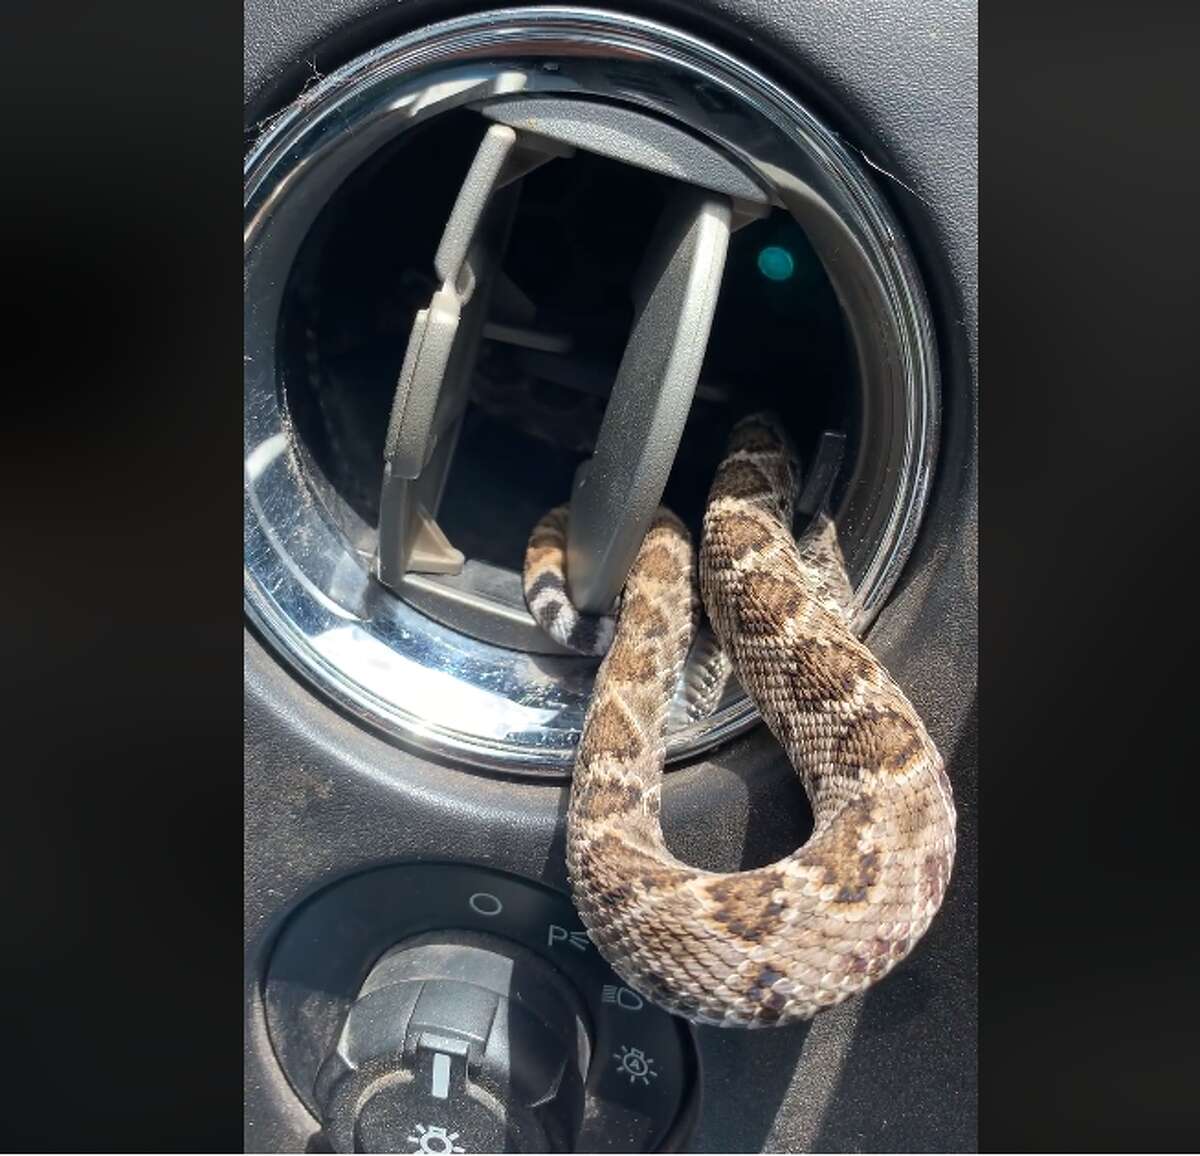 During a drive out to a nearby field in Hood County, Bob Crowell found a foot-long rattlesnake in the vent of his truck.